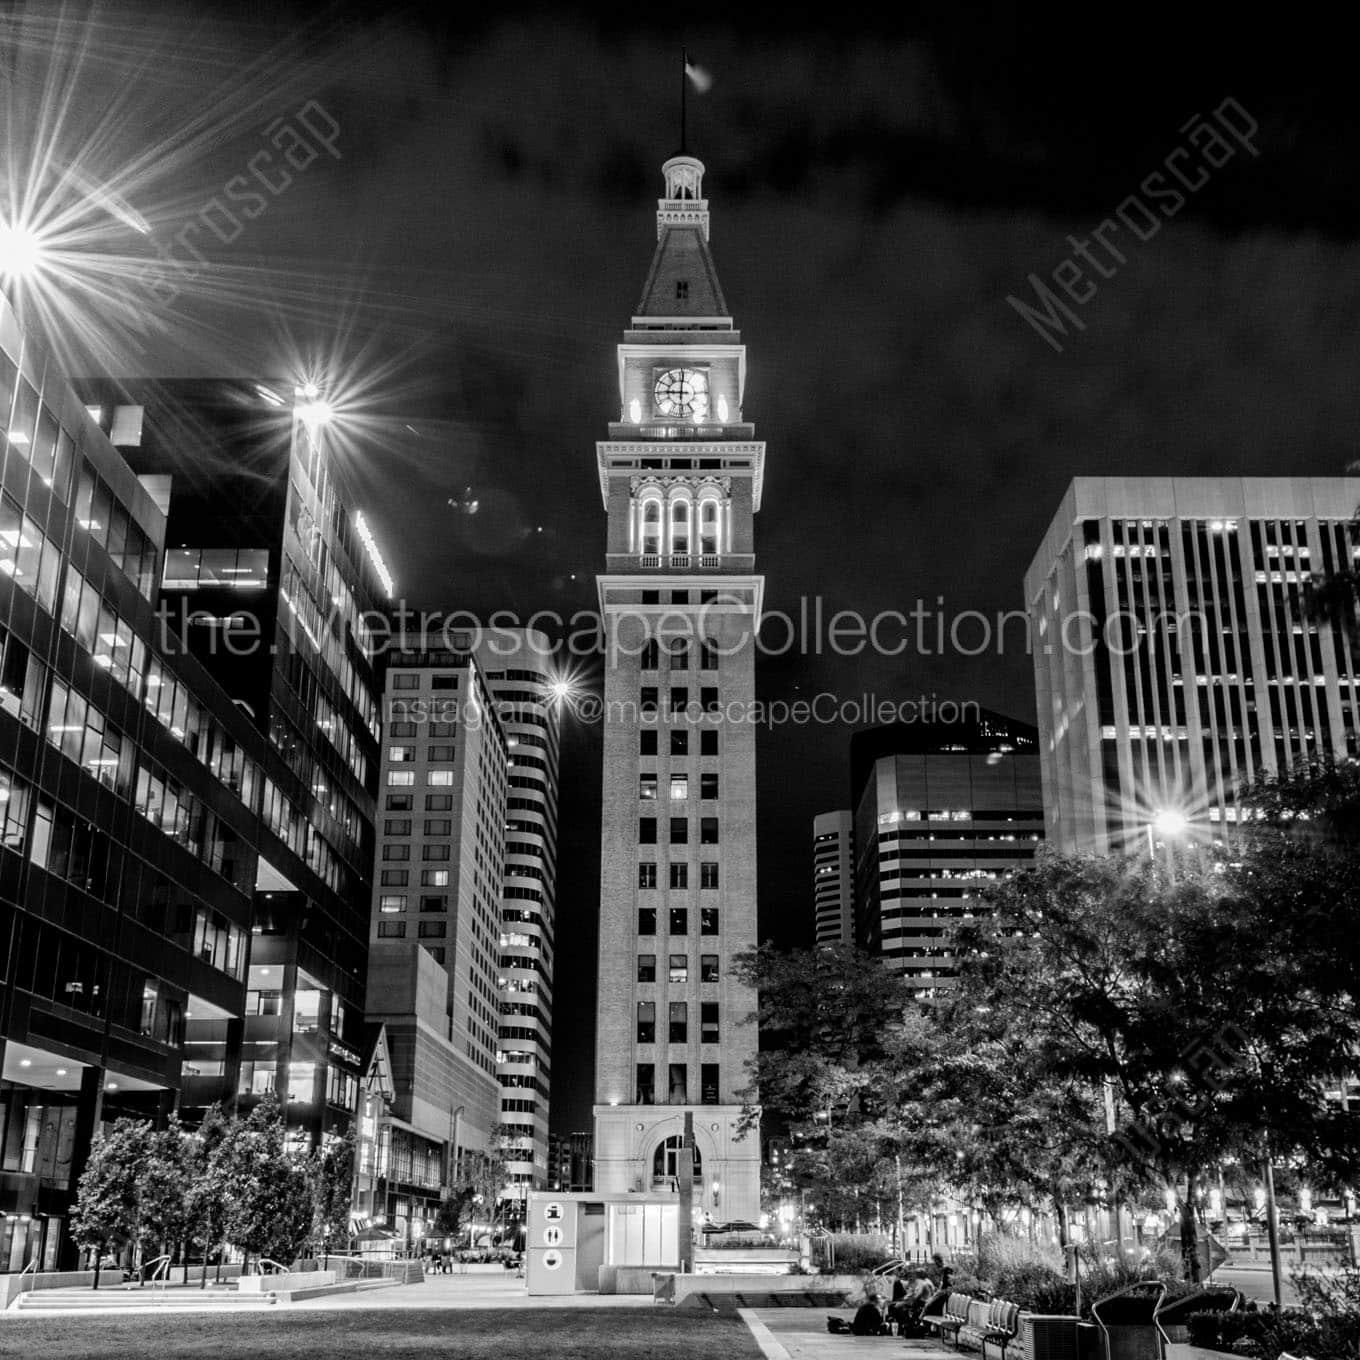 daniels fisher building at night Black & White Office Art